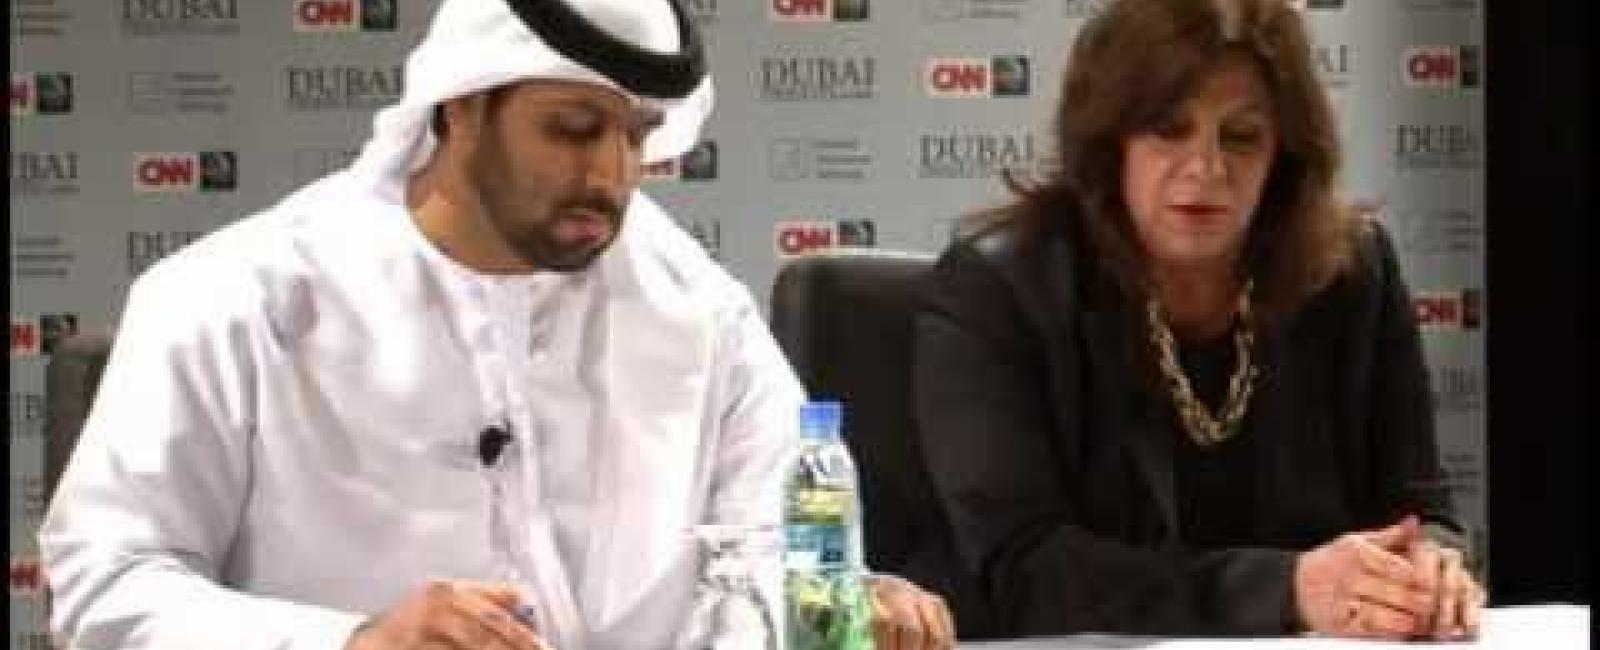 The Arabian Gulf: What's after oil and gas? (Dubai Debates 3)